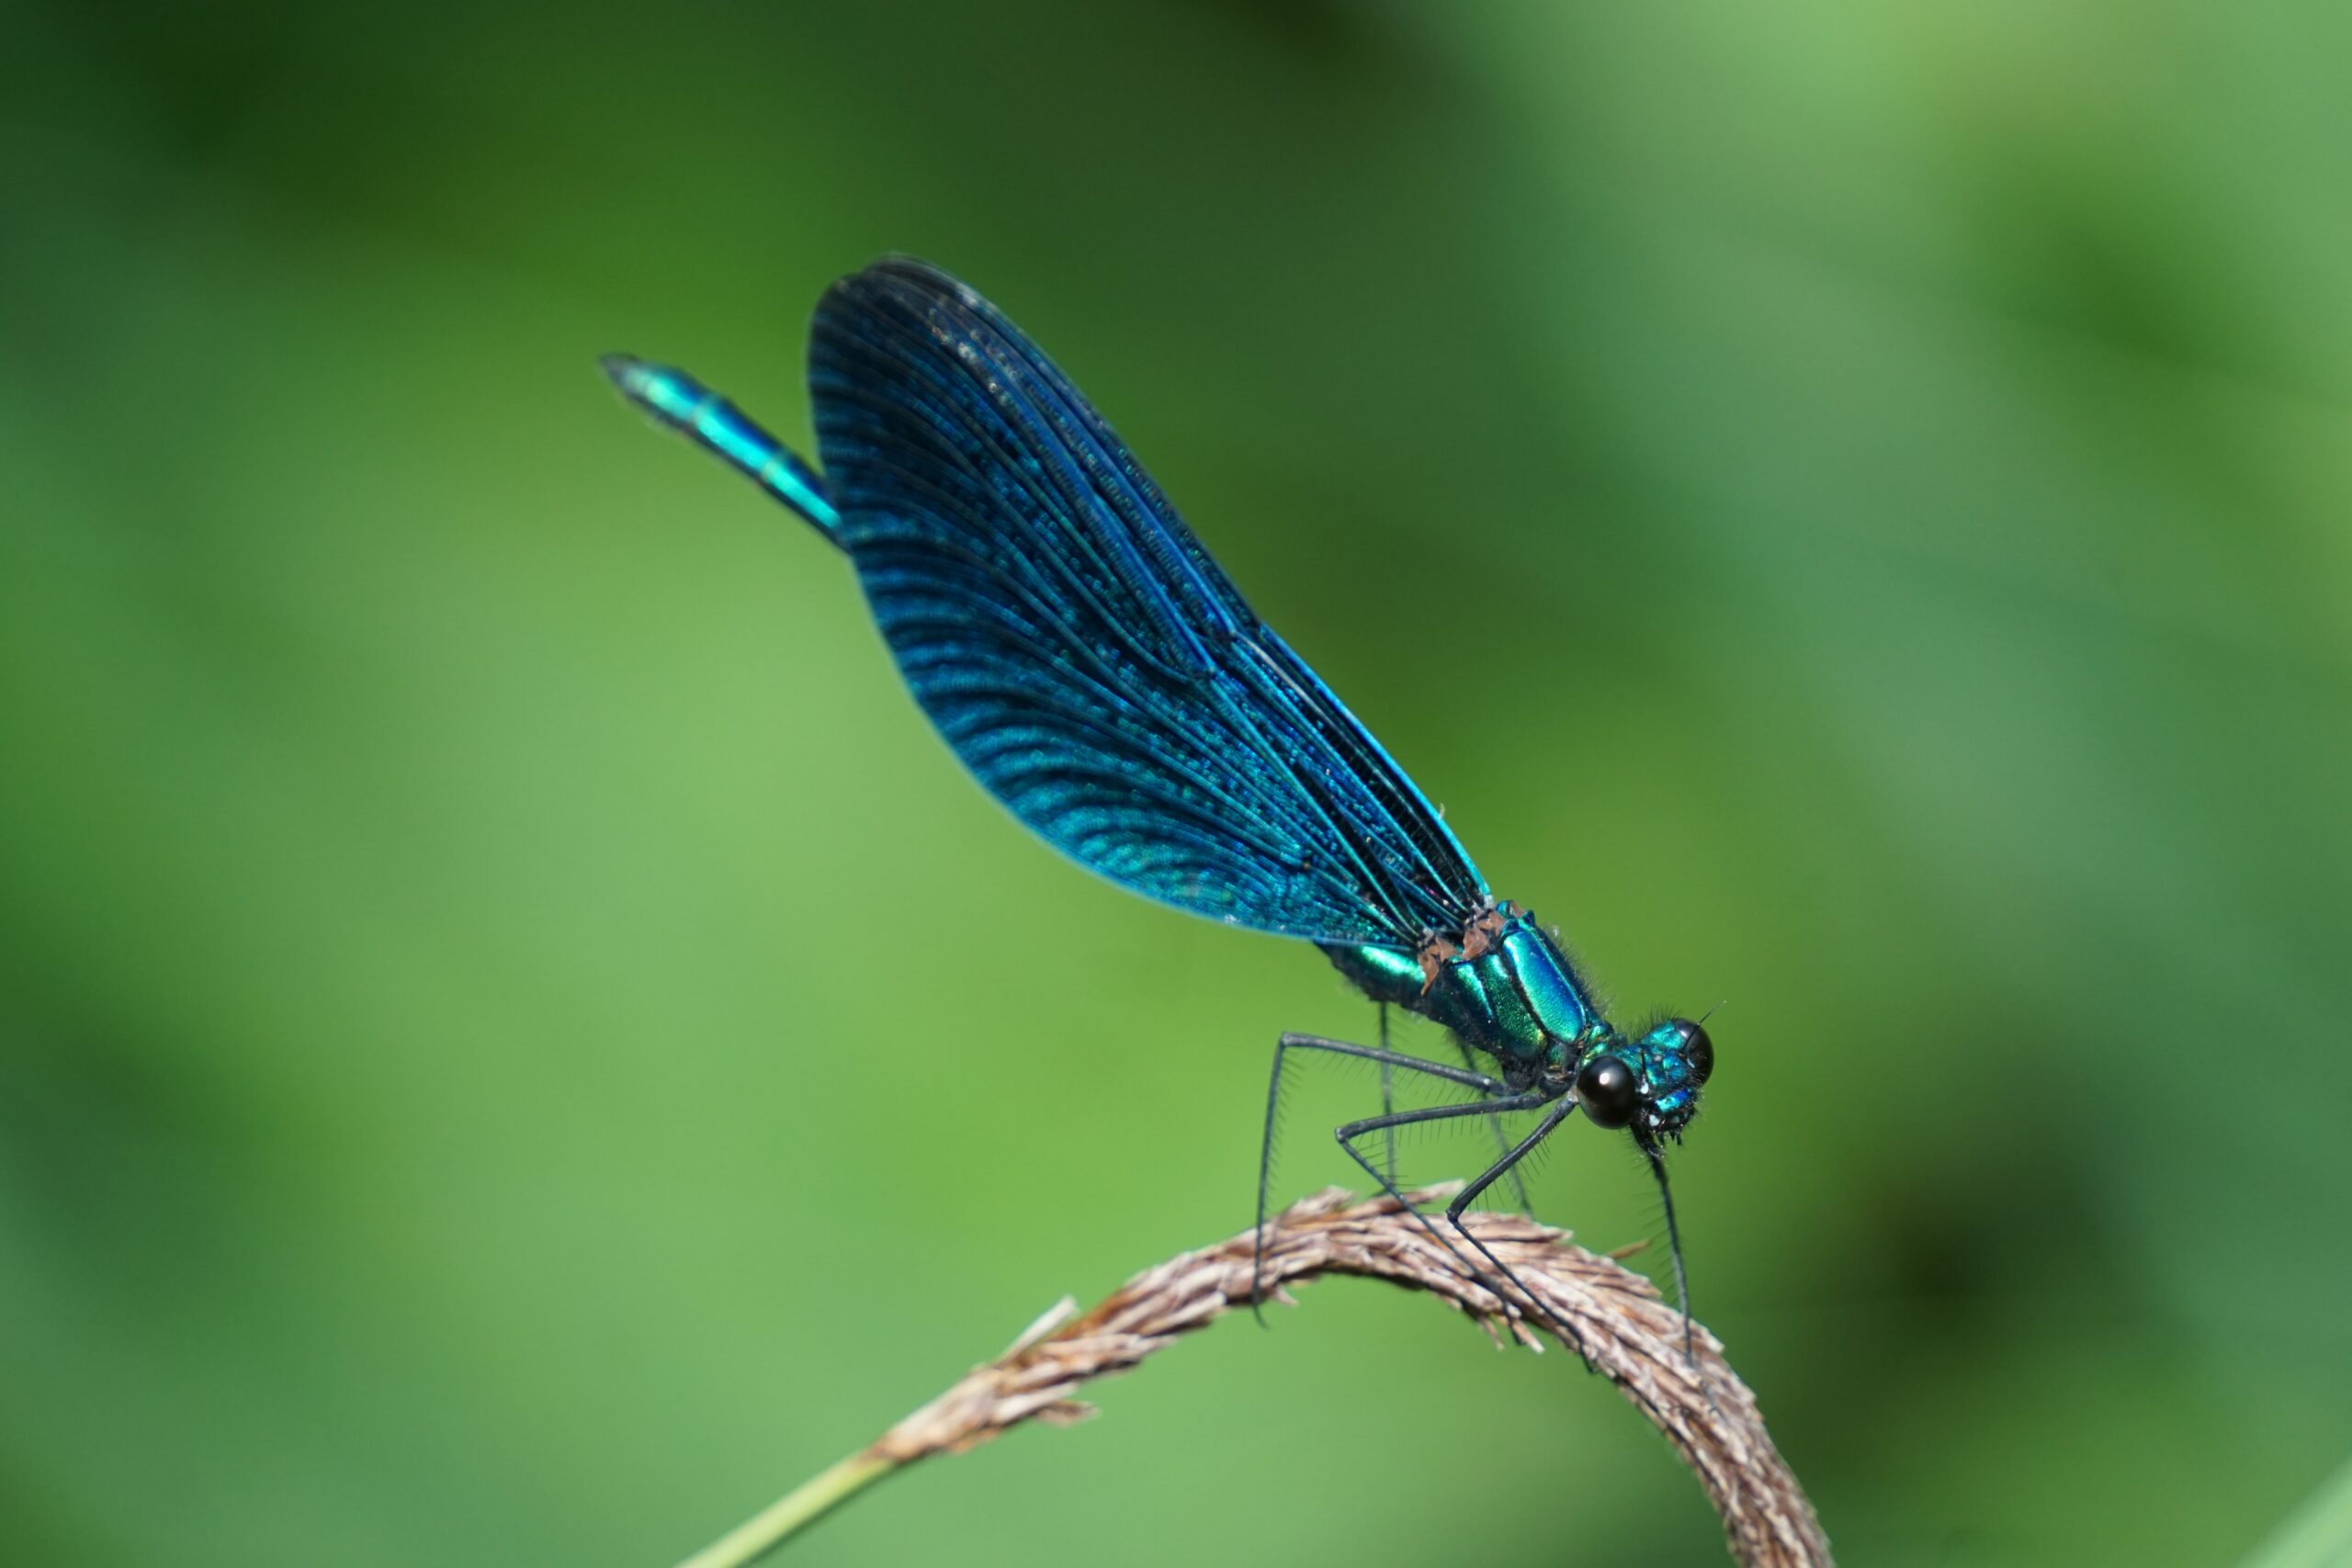 Dragon fly | photography, images, and art for hotels, office buildings, homes, restaurants, hospitals, and shopping malls